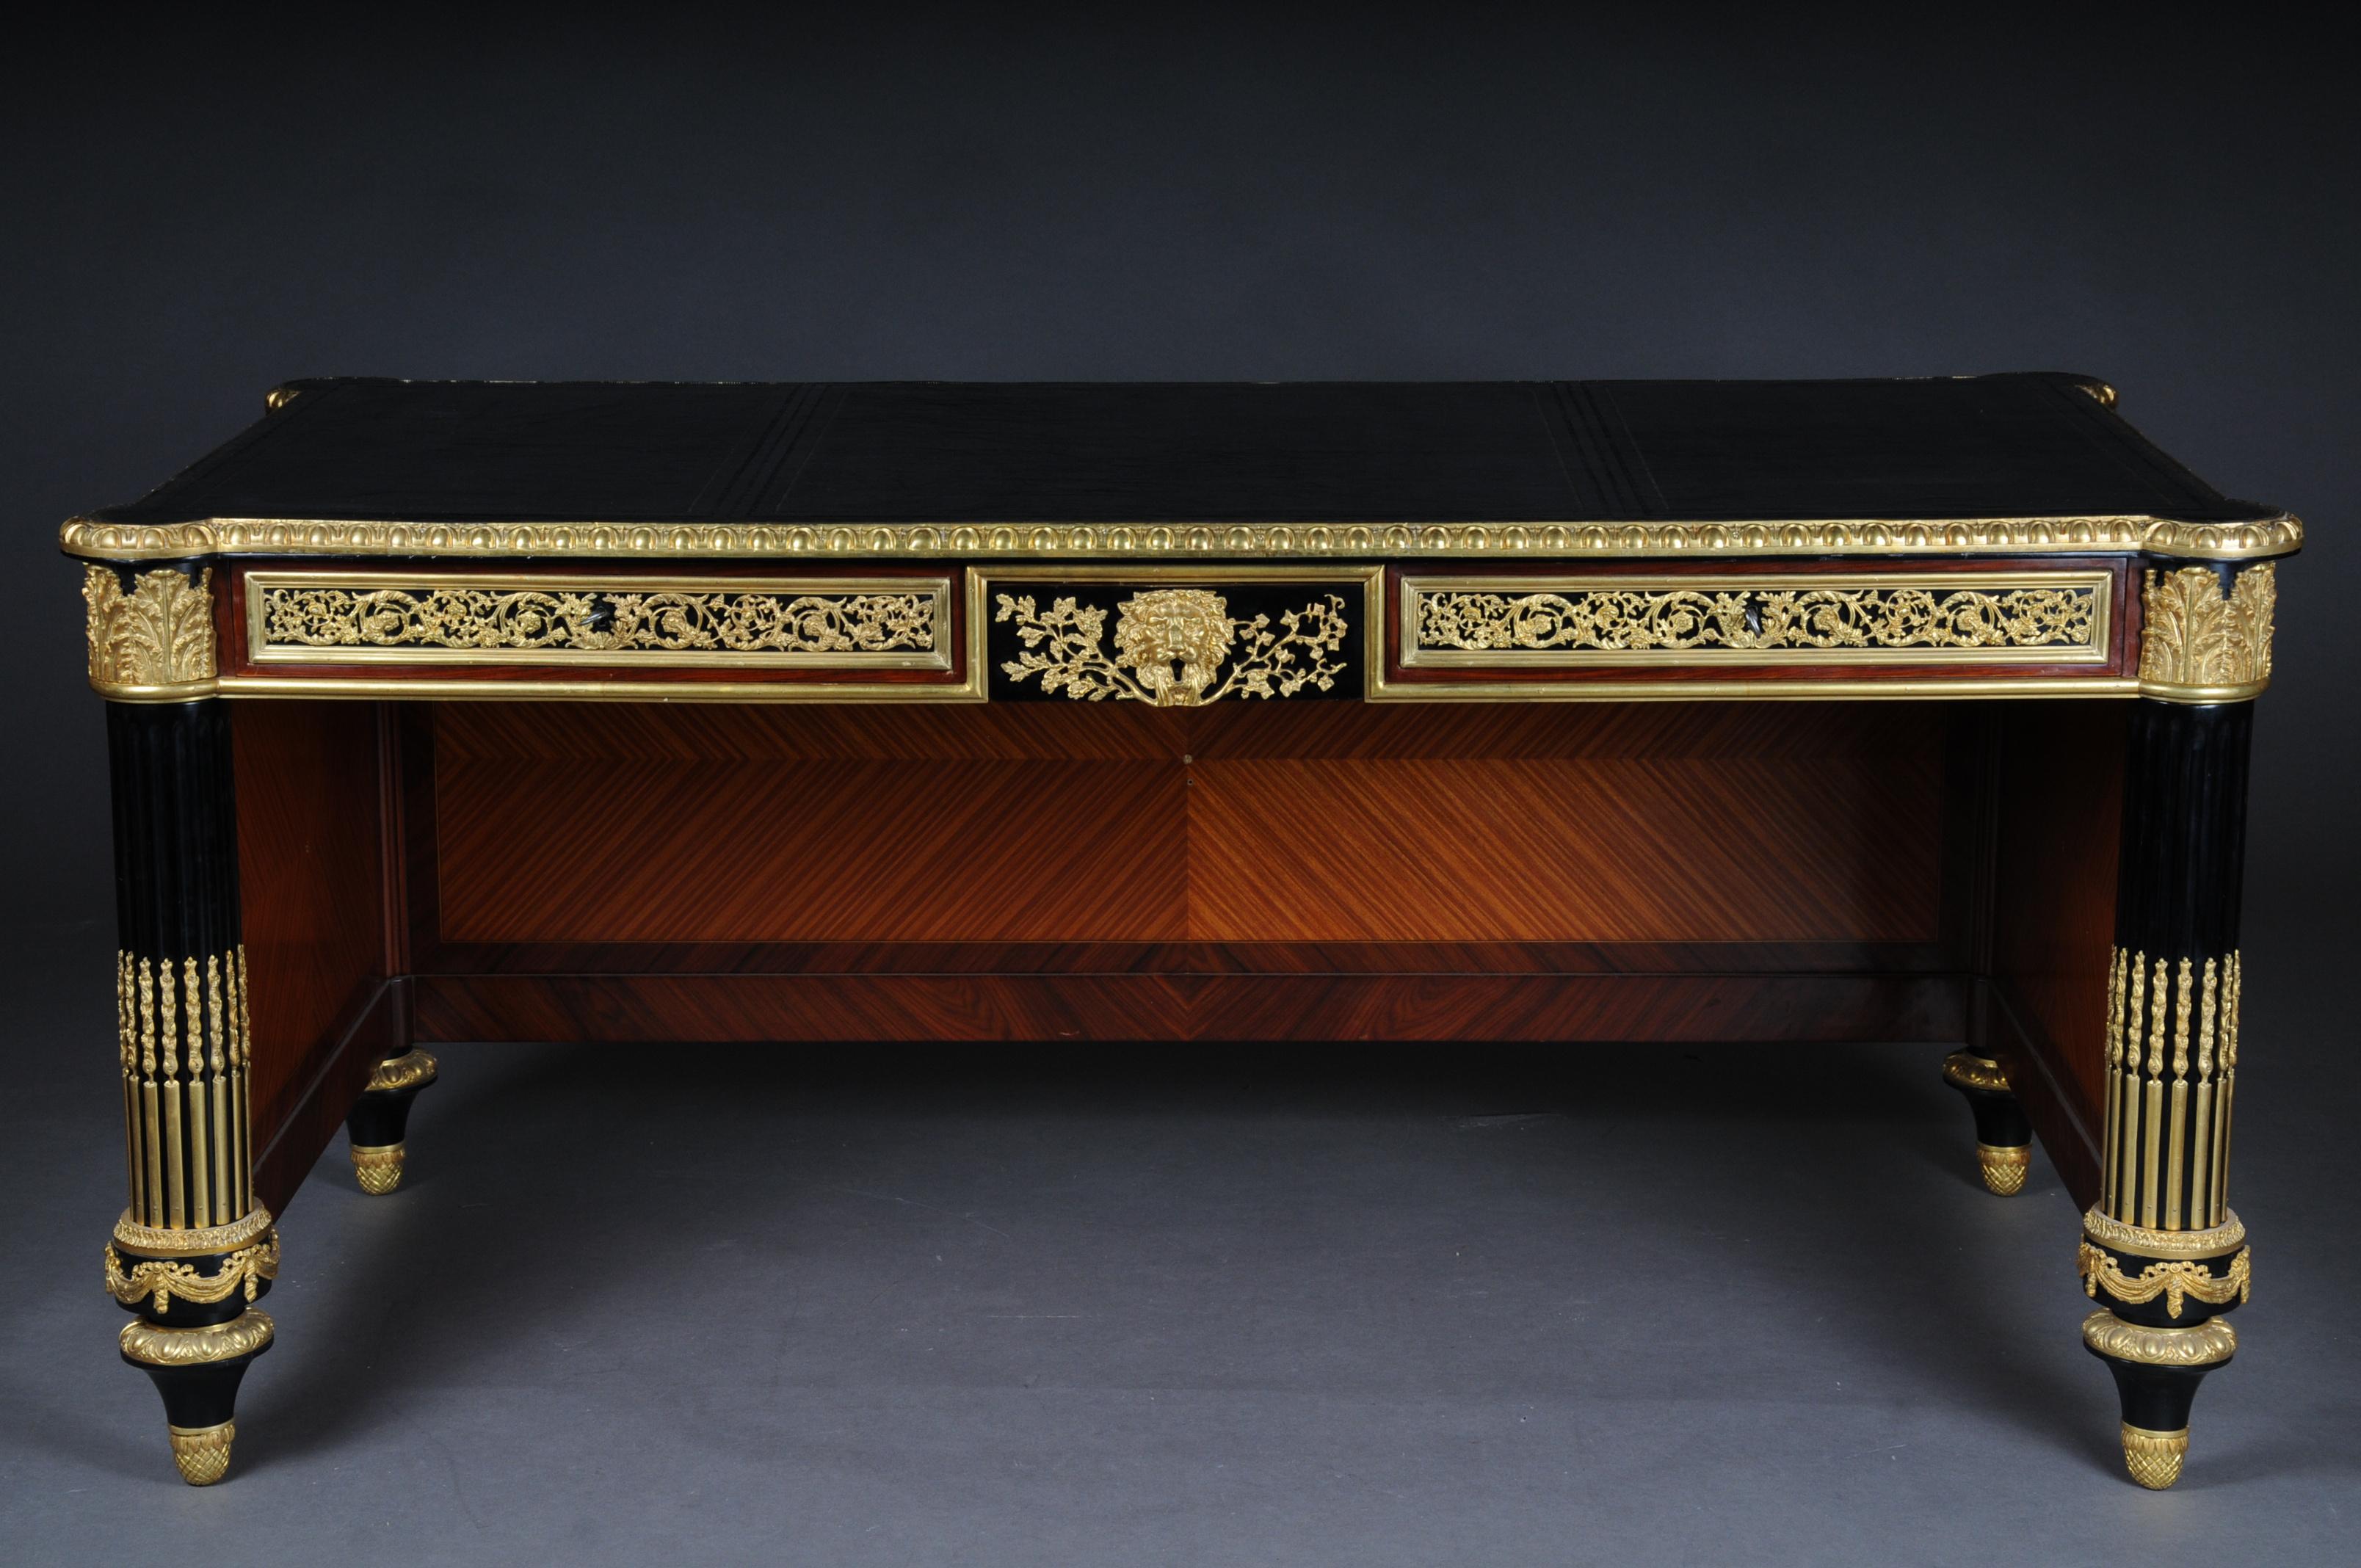 20th Century Imperial Bureau Plat / Writing Desk in the Style of Louis XVI For Sale 9